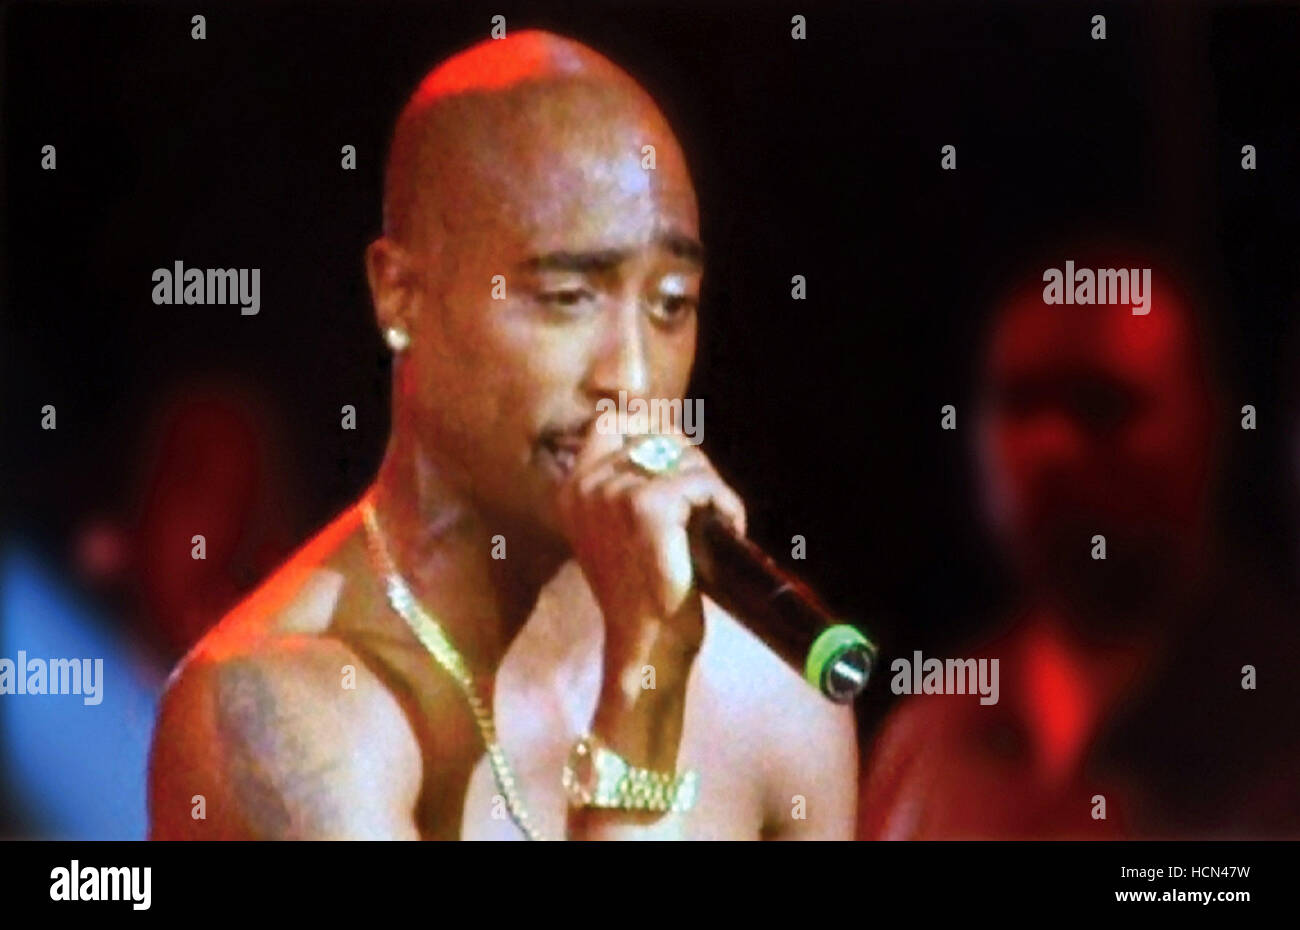 TUPAC: LIVE AT THE HOUSE OF BLUES, Tupac Shakur, 2005. ©Eagle Rock/courtesy Everett Collection Stock Photo